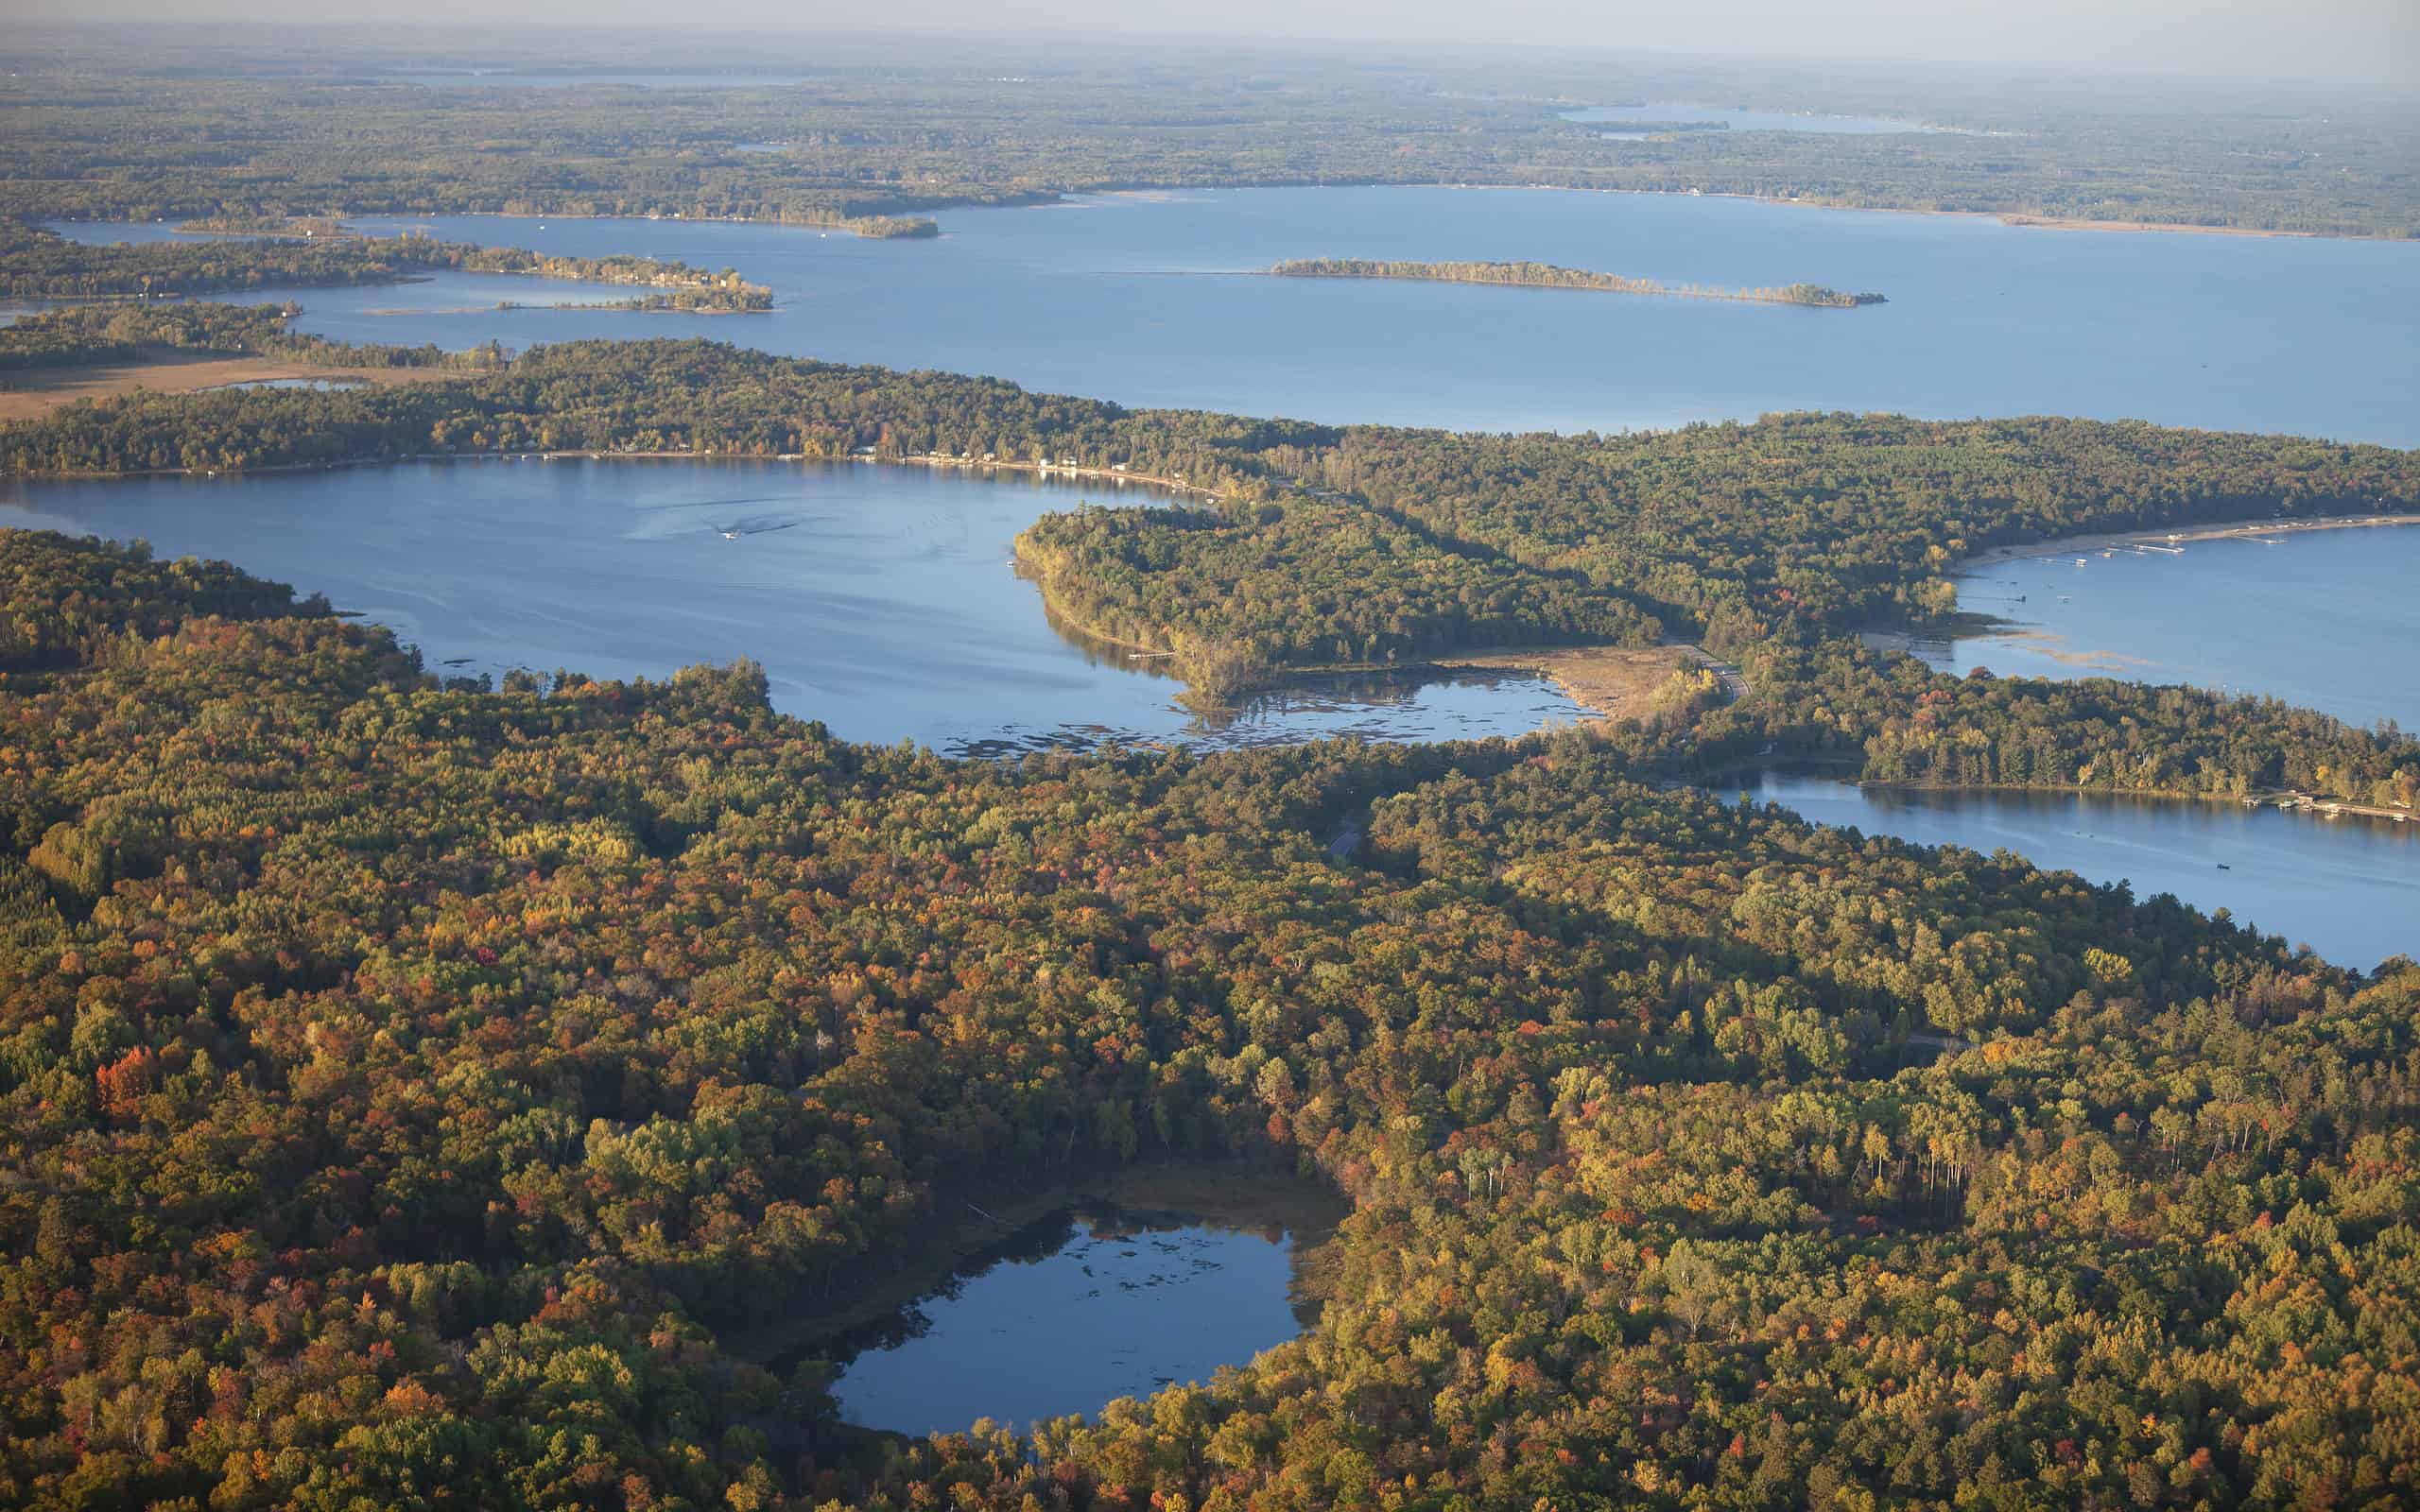 Aerial view of lakes and trees in autumn color near Brainerd Minnesota